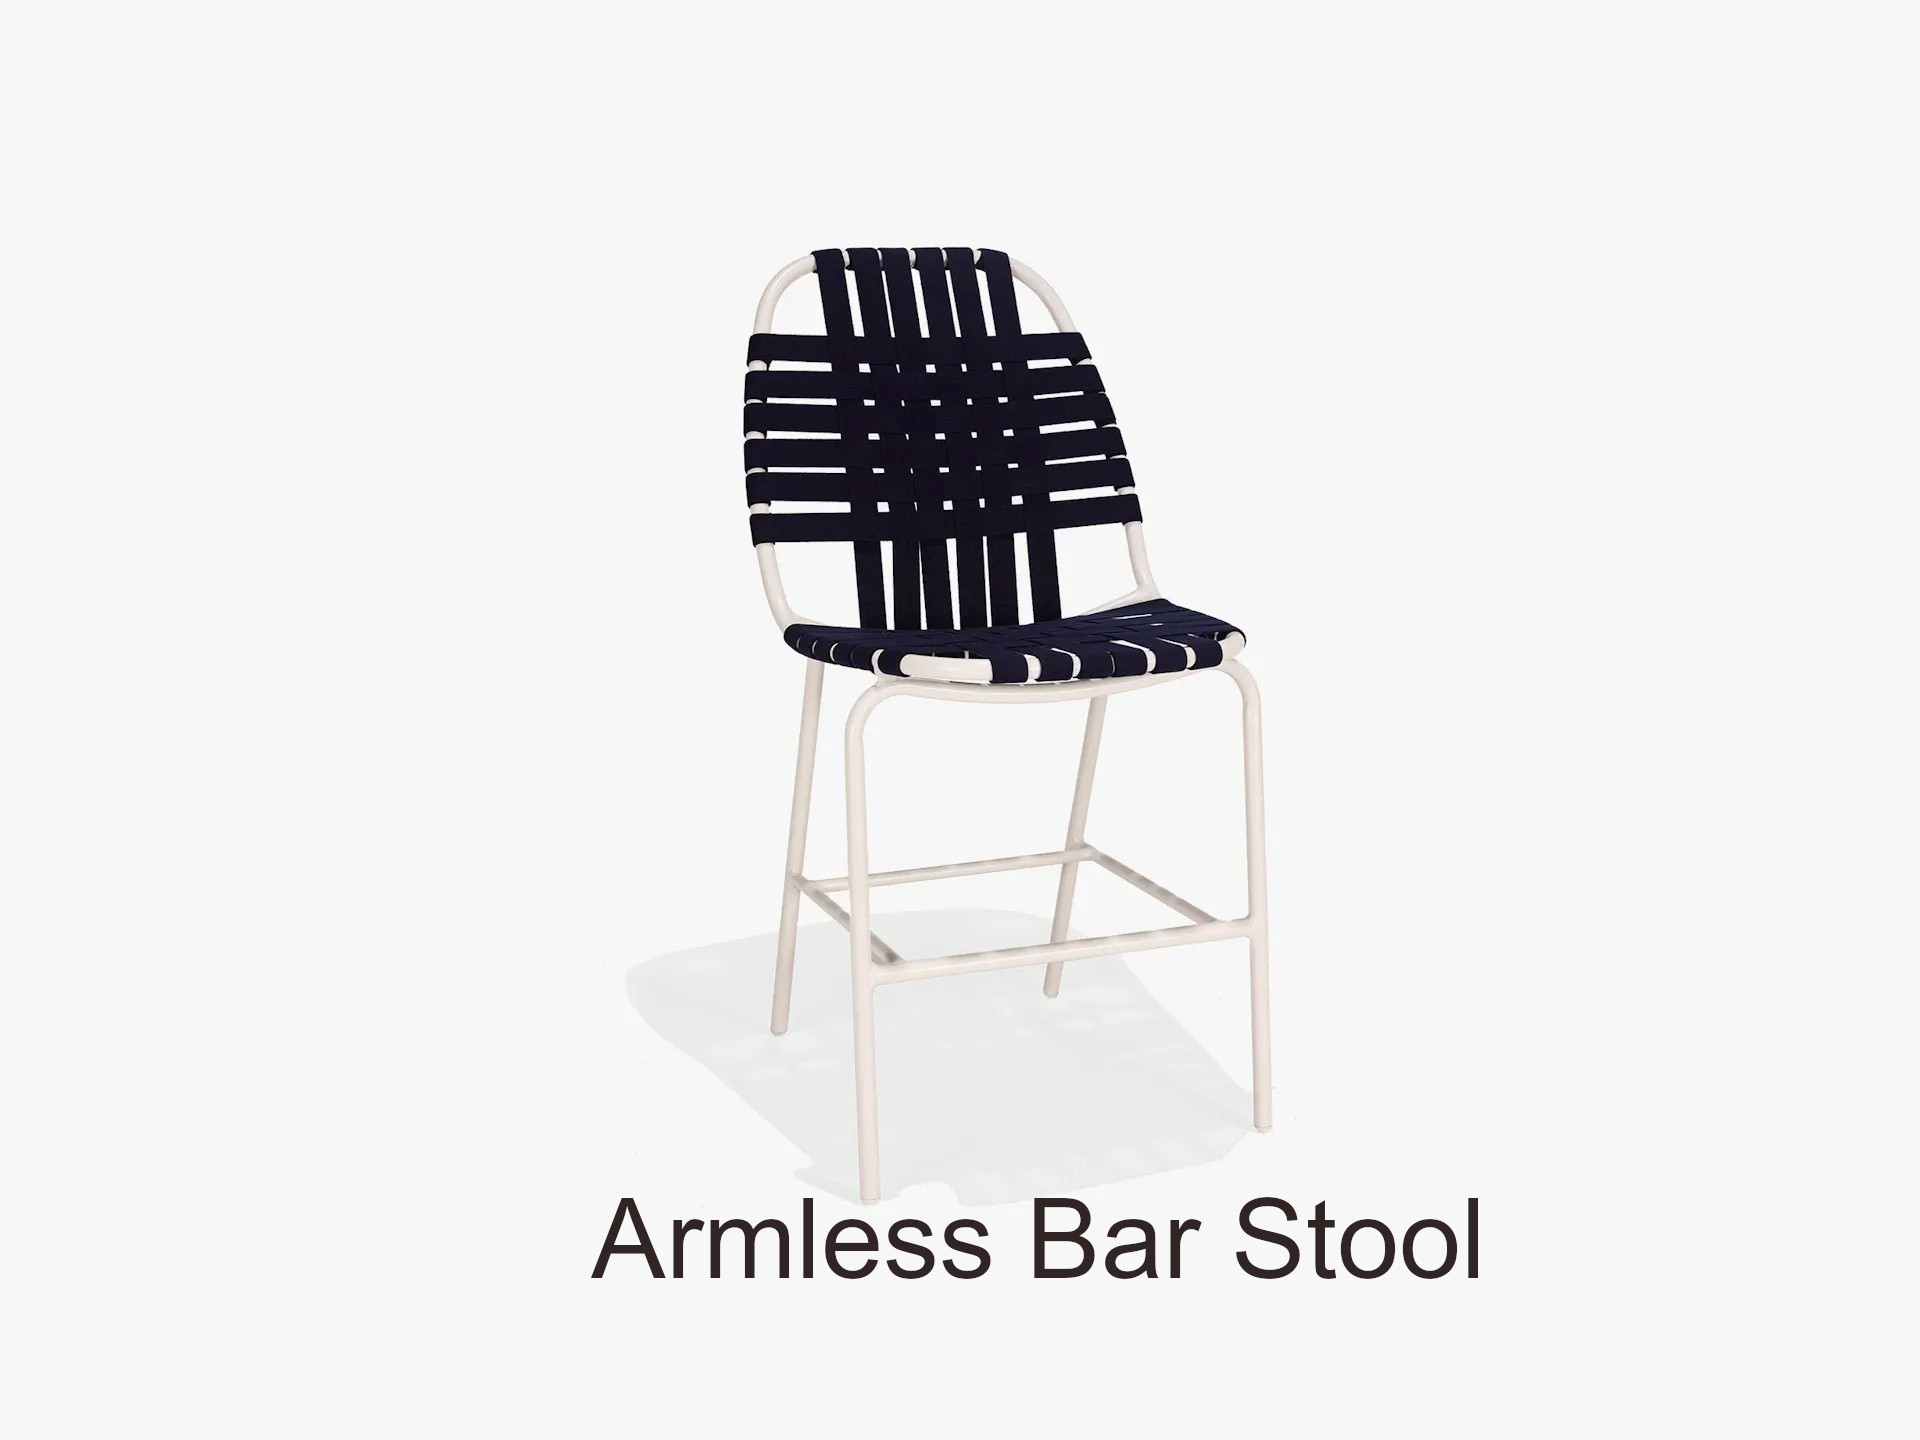 Surf Suncloth Weave Collection Armless Bar Stool